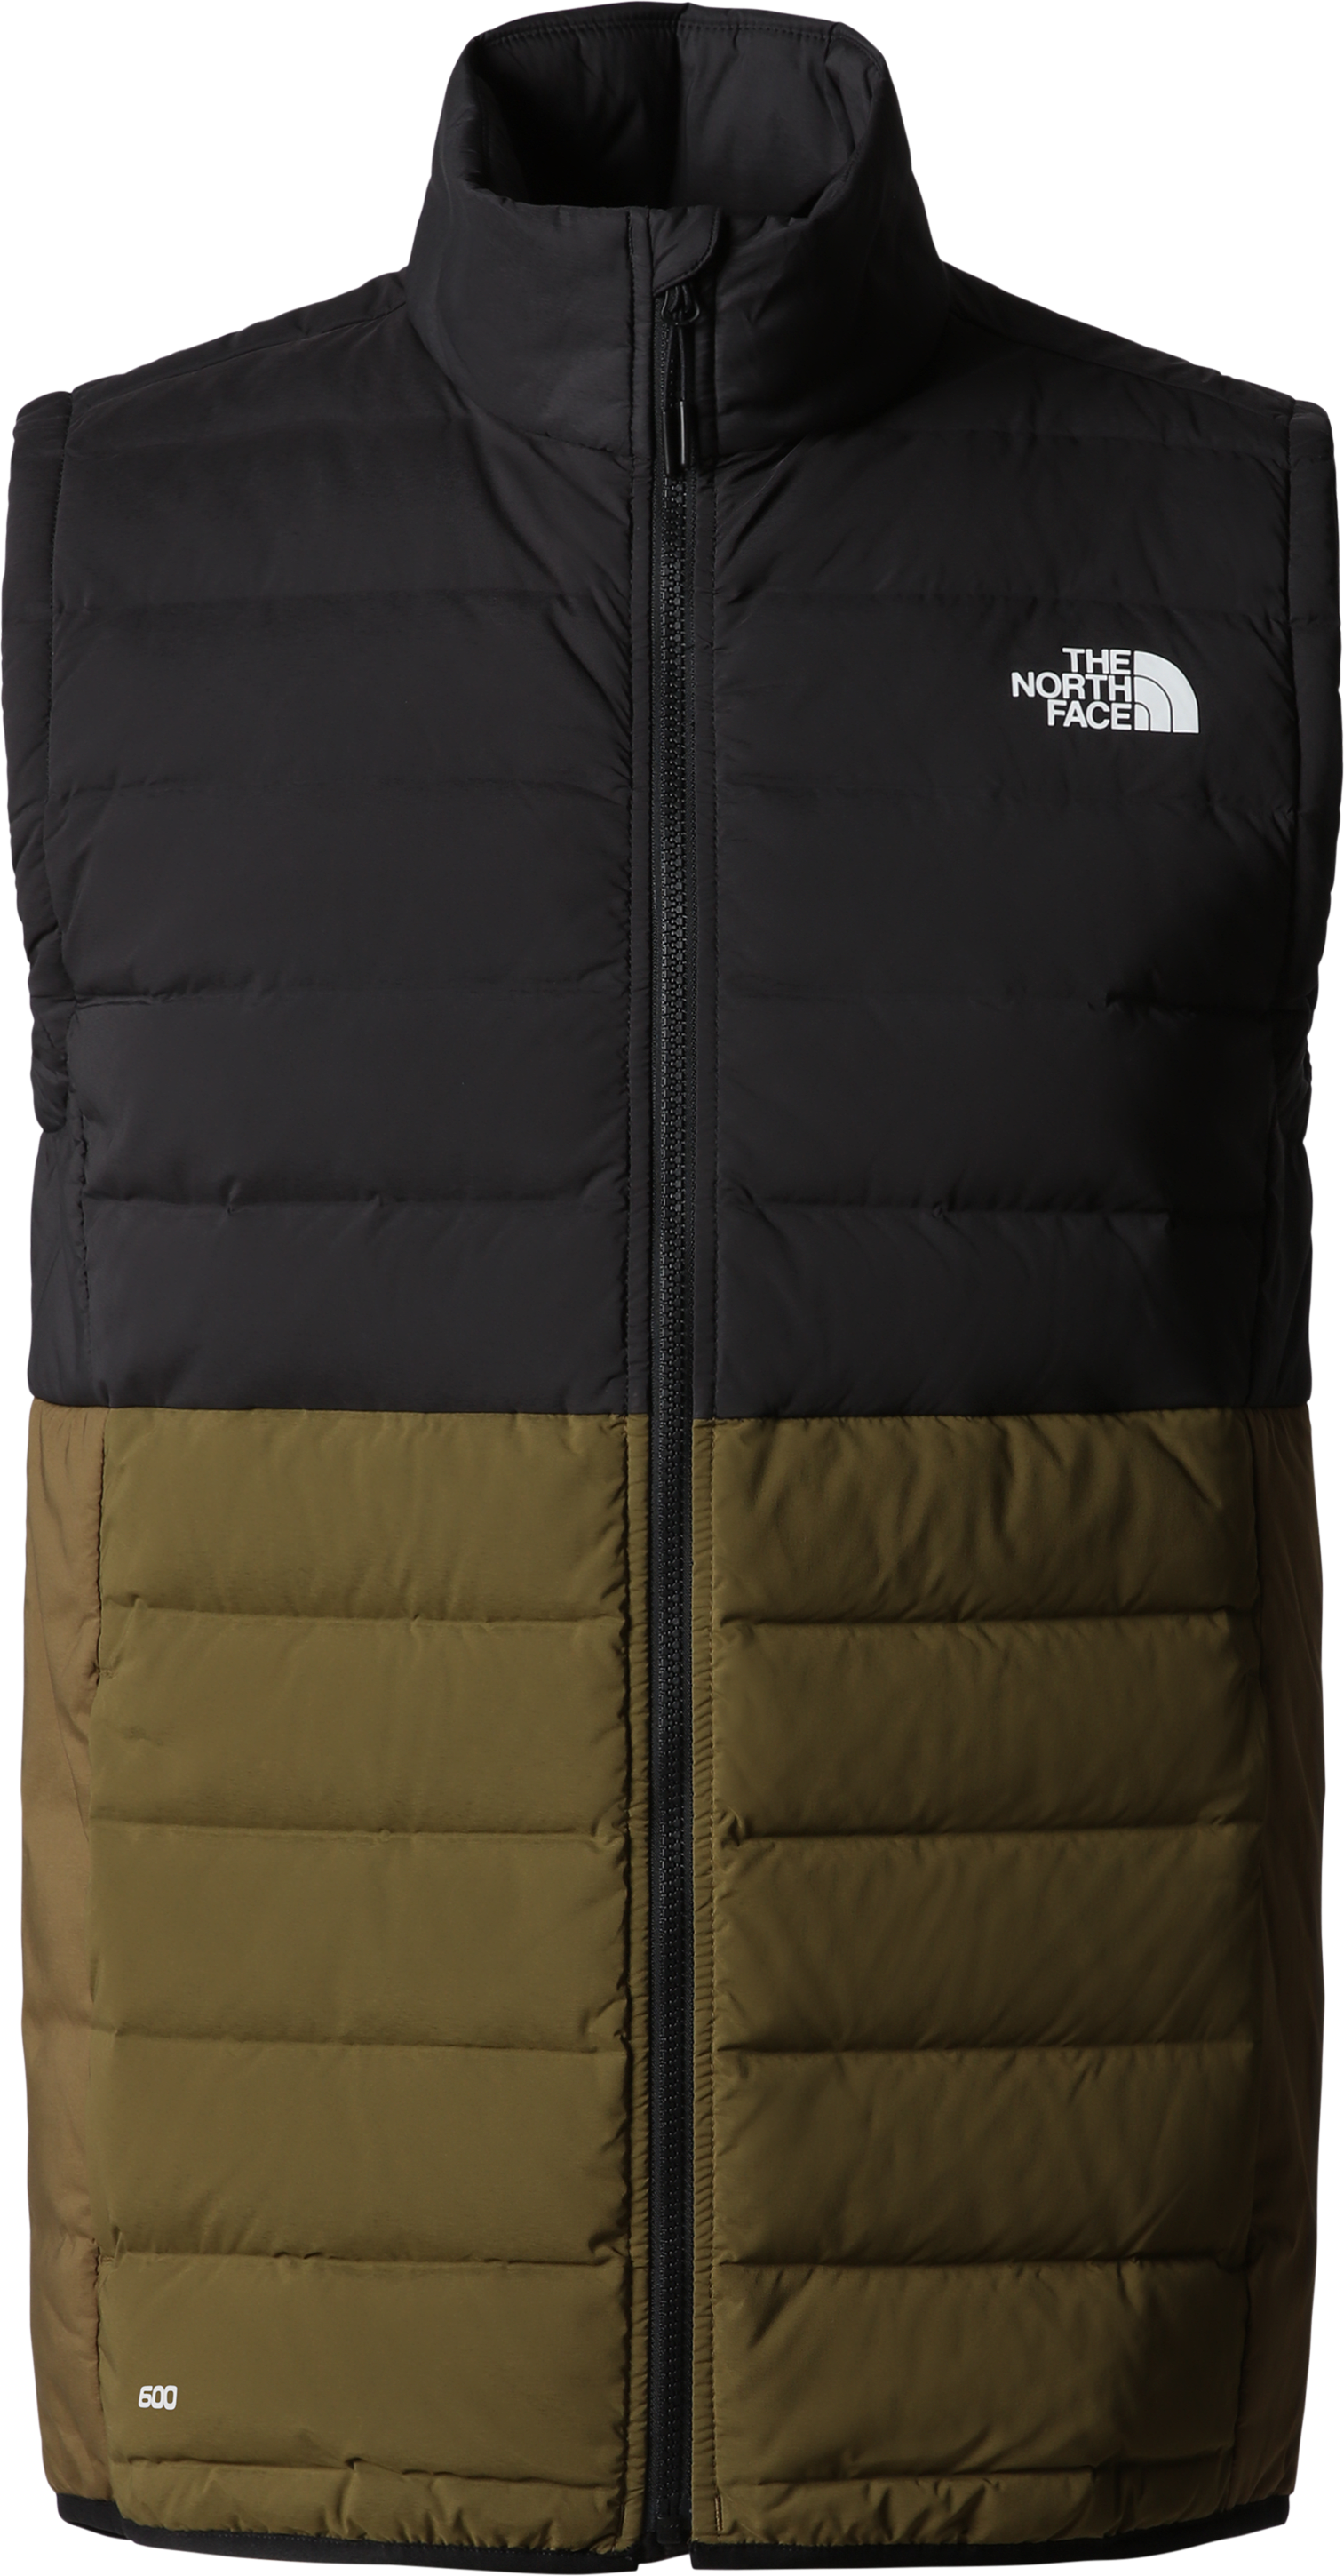 The North Face Men’s Belleview Stretch Down Gilet Tnf Black/Military Olive